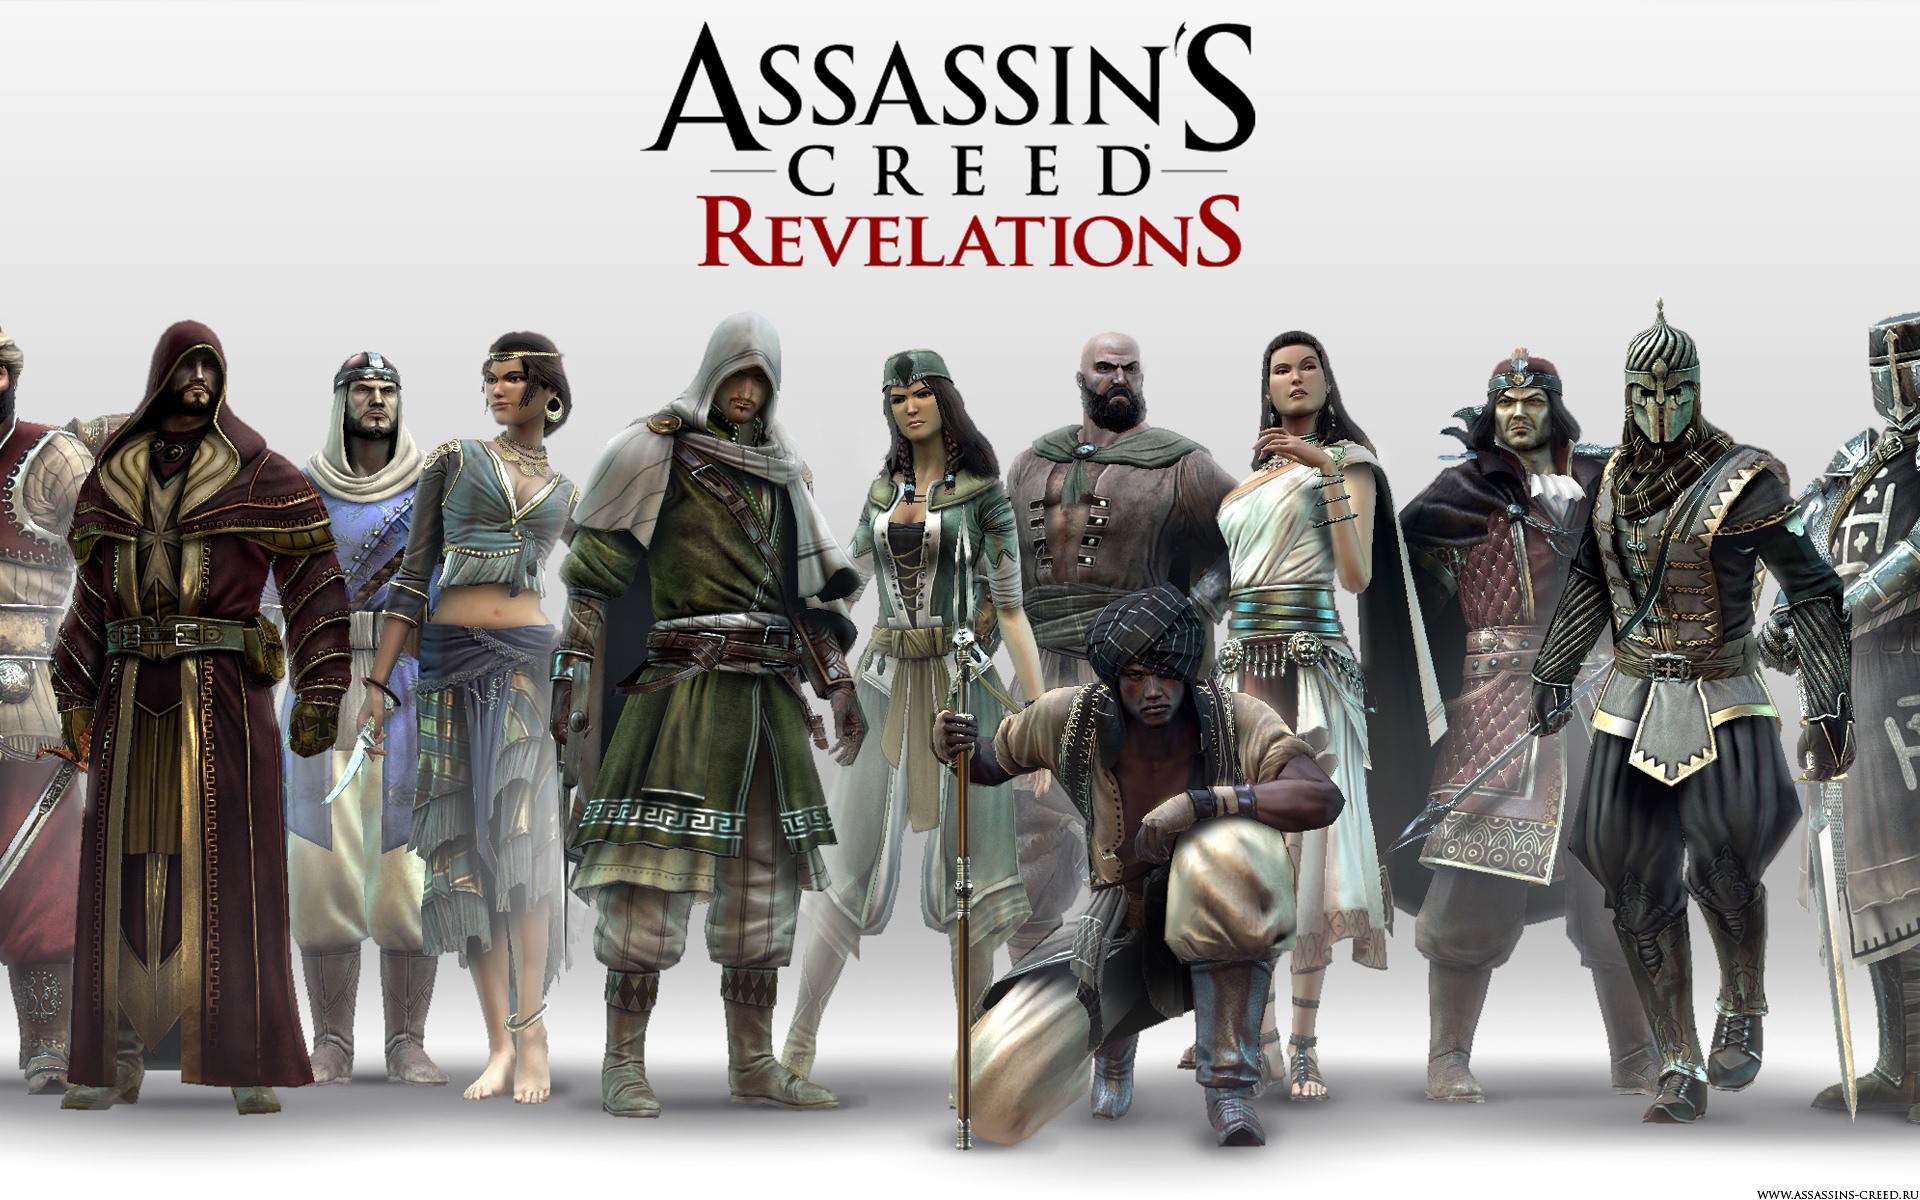 Assassin's Creed: Revelations HD wallpapers #27 - 1920x1200